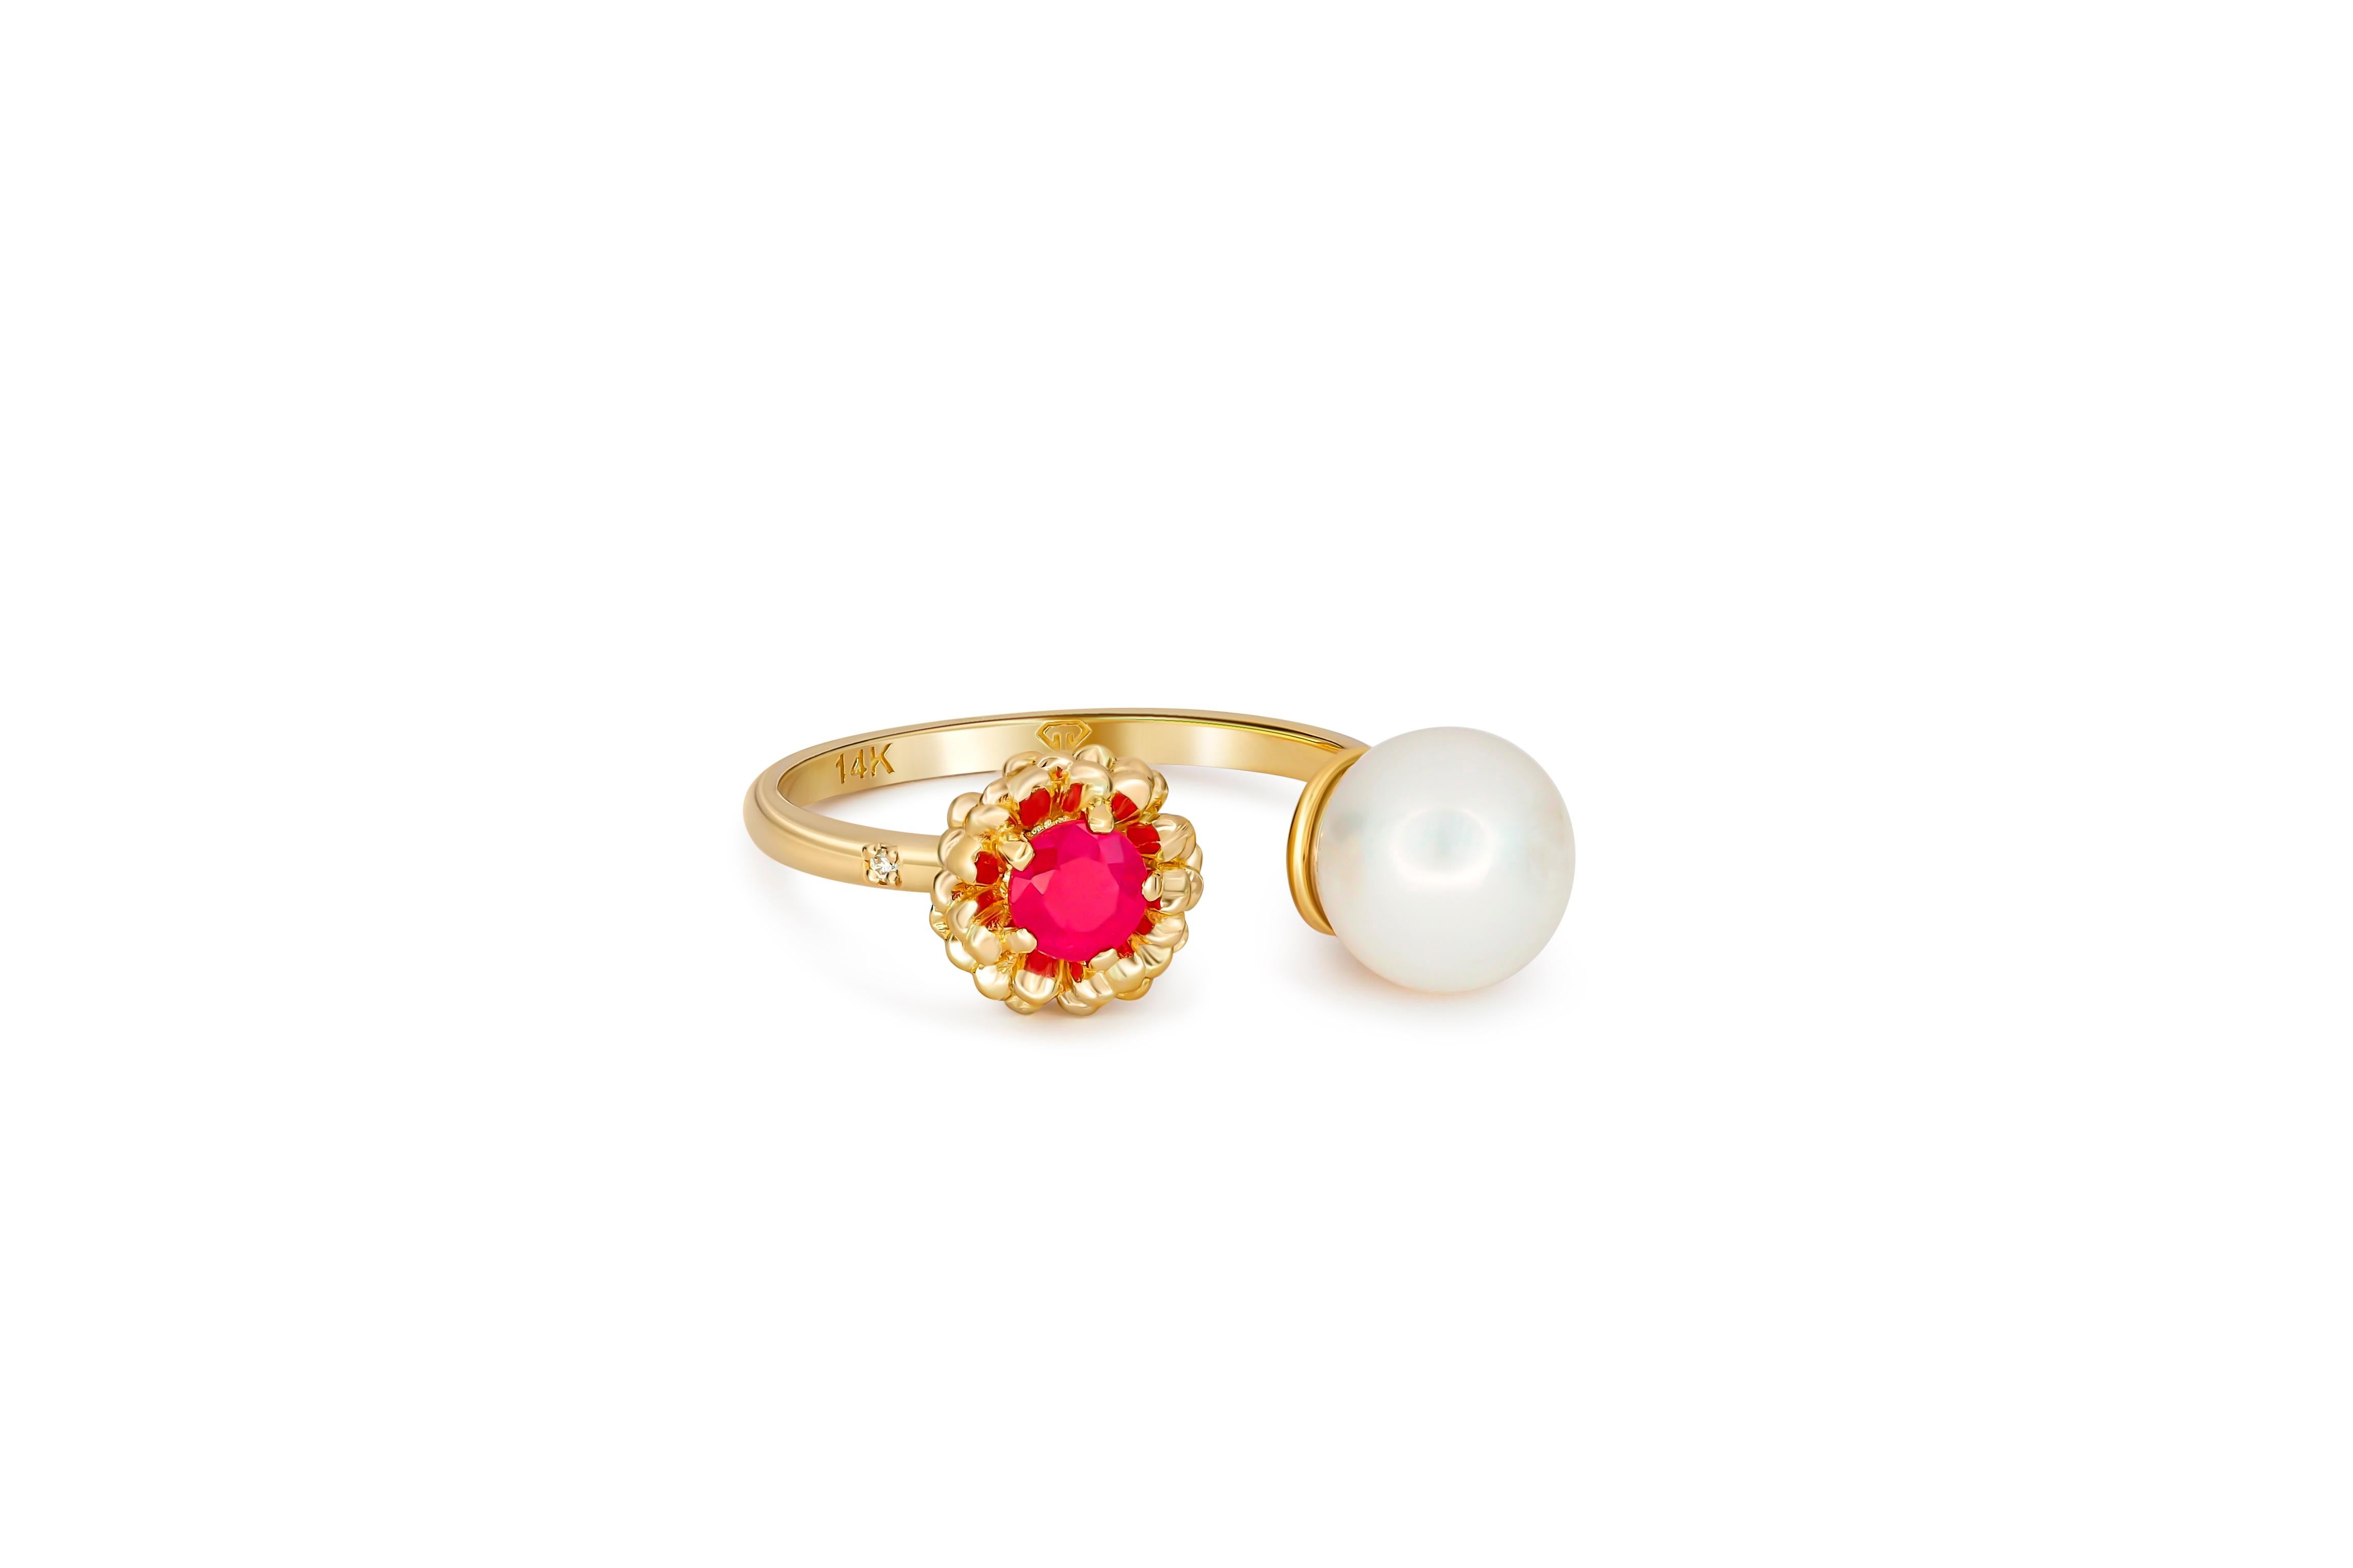 Daisy ring with ruby. 
14k gold ring with ruby. Round ruby ring. Pearl and ruby ring. Open Ended Ring with ruby. Flower ruby ring.

Metal: 14k gold
Weight: 3.00 g. depends from size.

Ruby: color - red
Round cut, 0.40 ct. approx
Clarity: Transparent